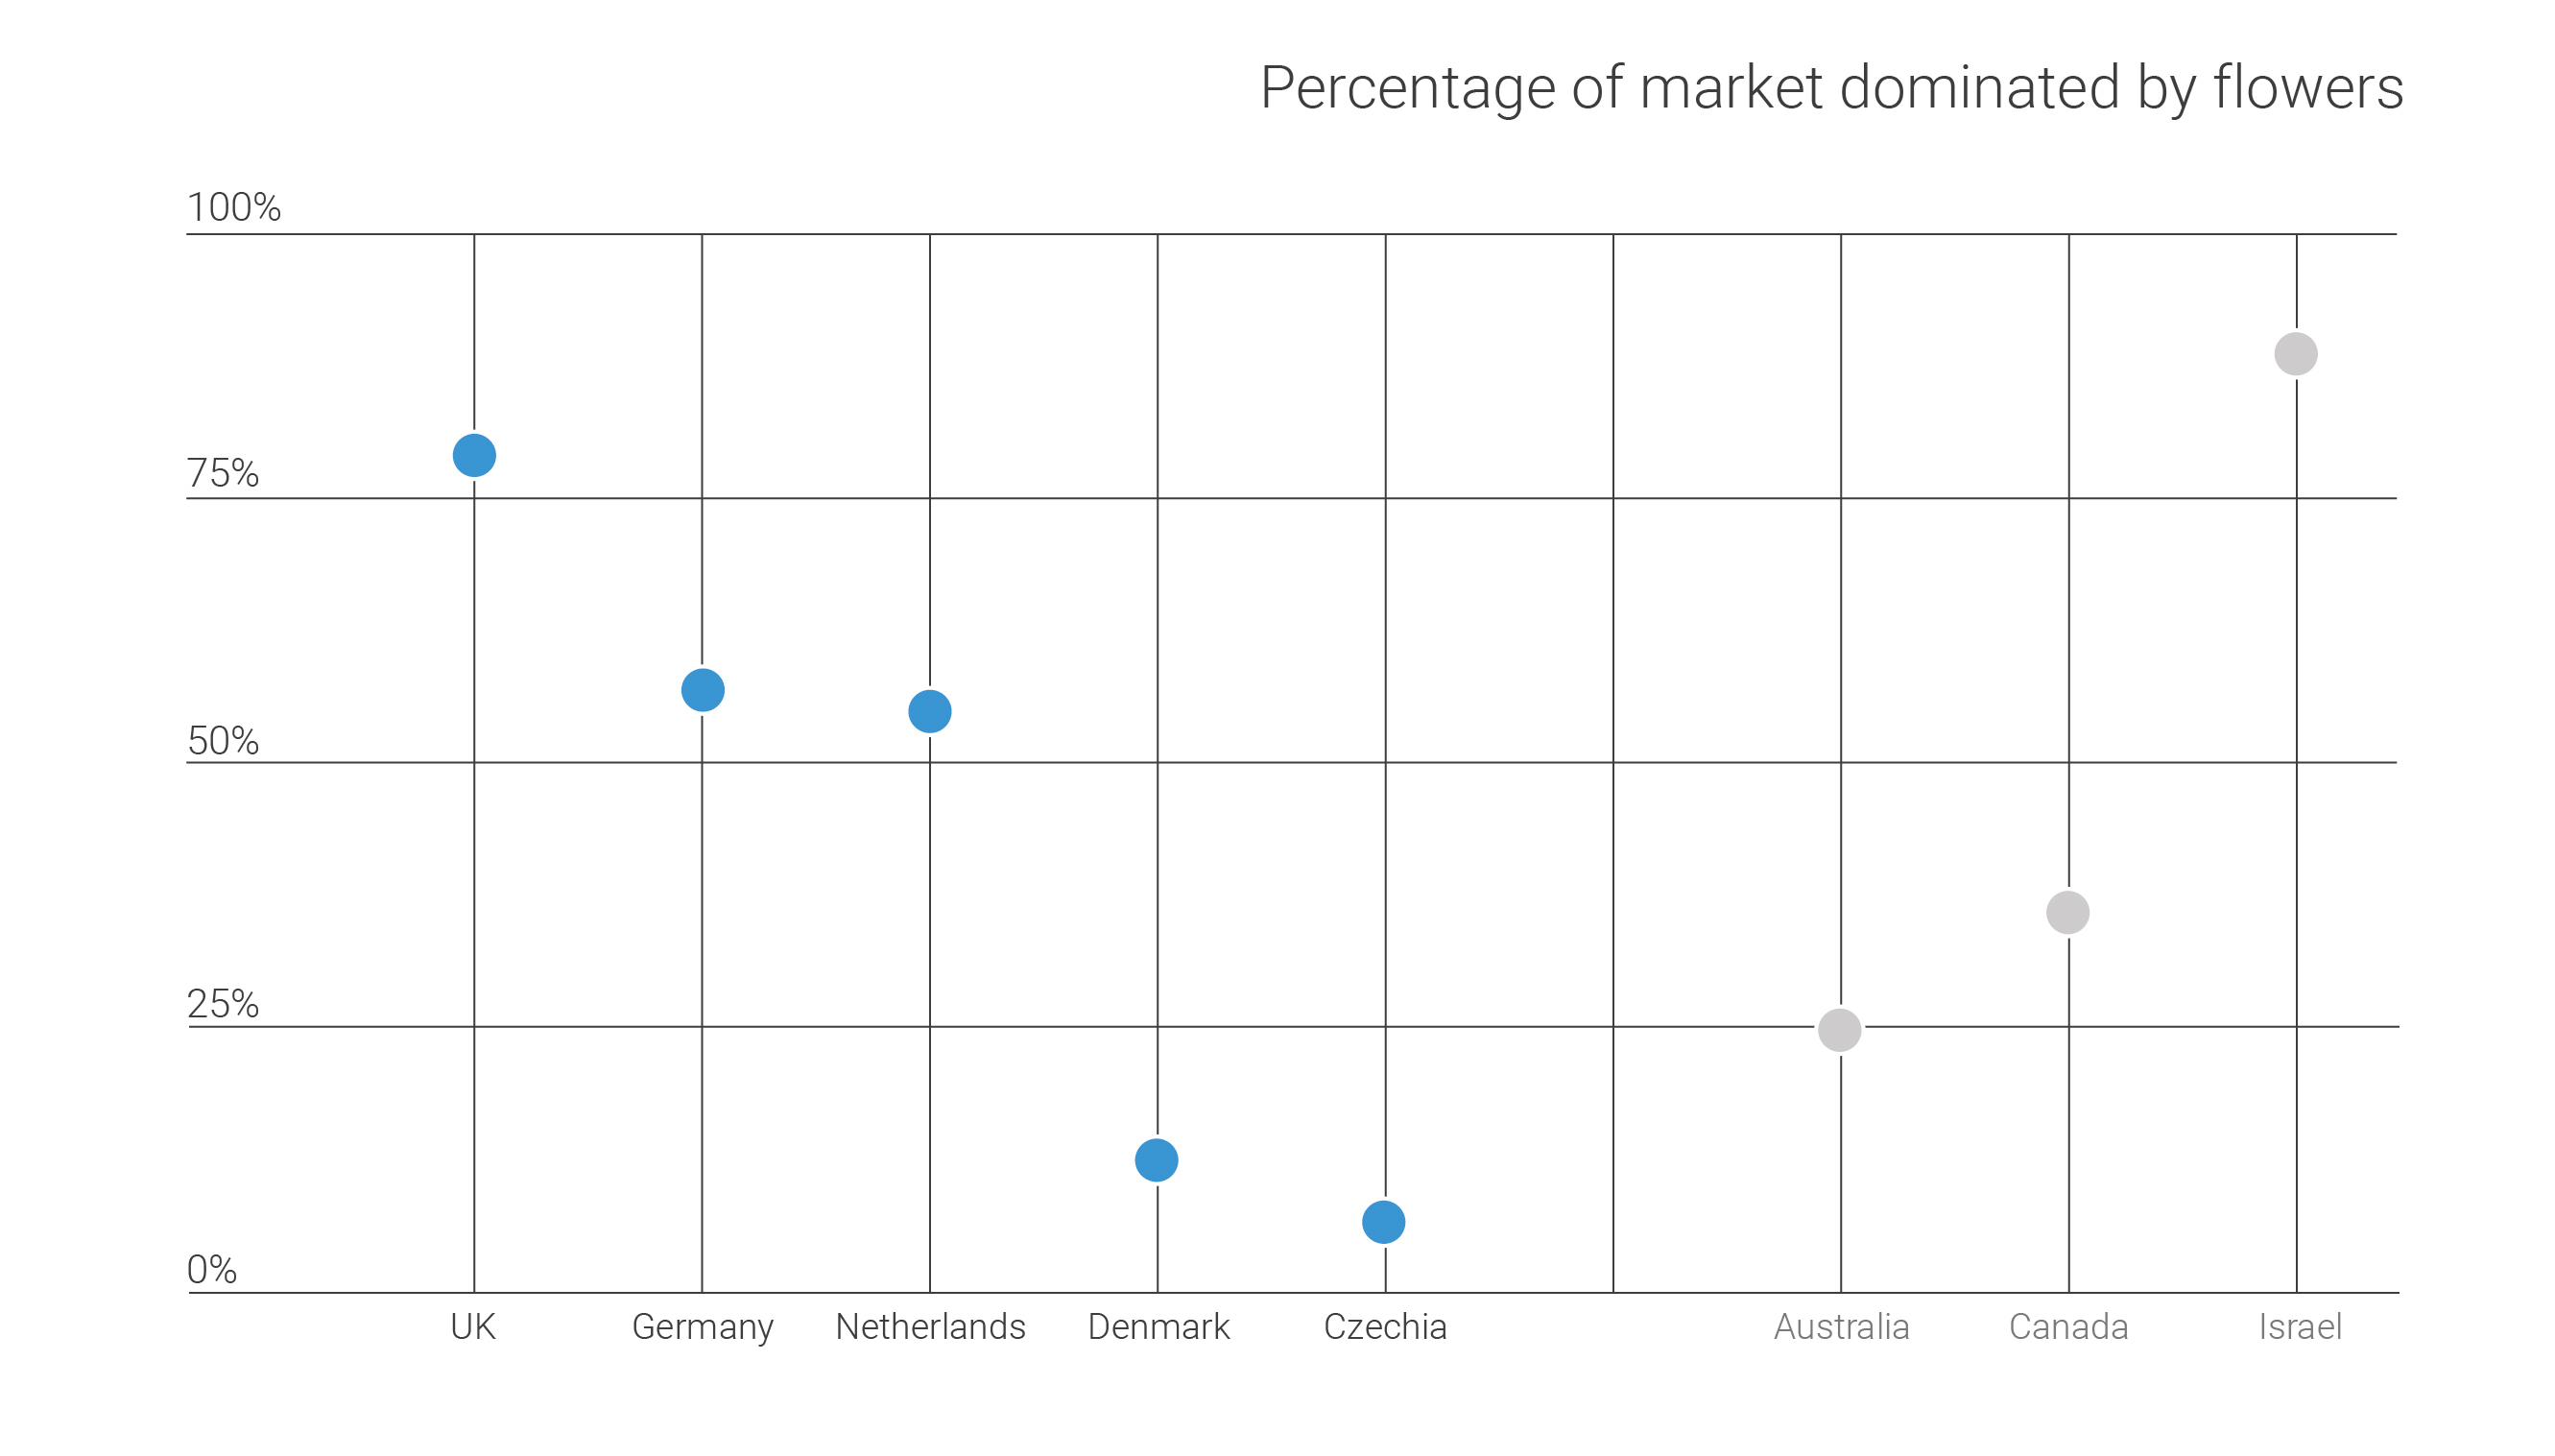 Percentage of market dominated by flowers